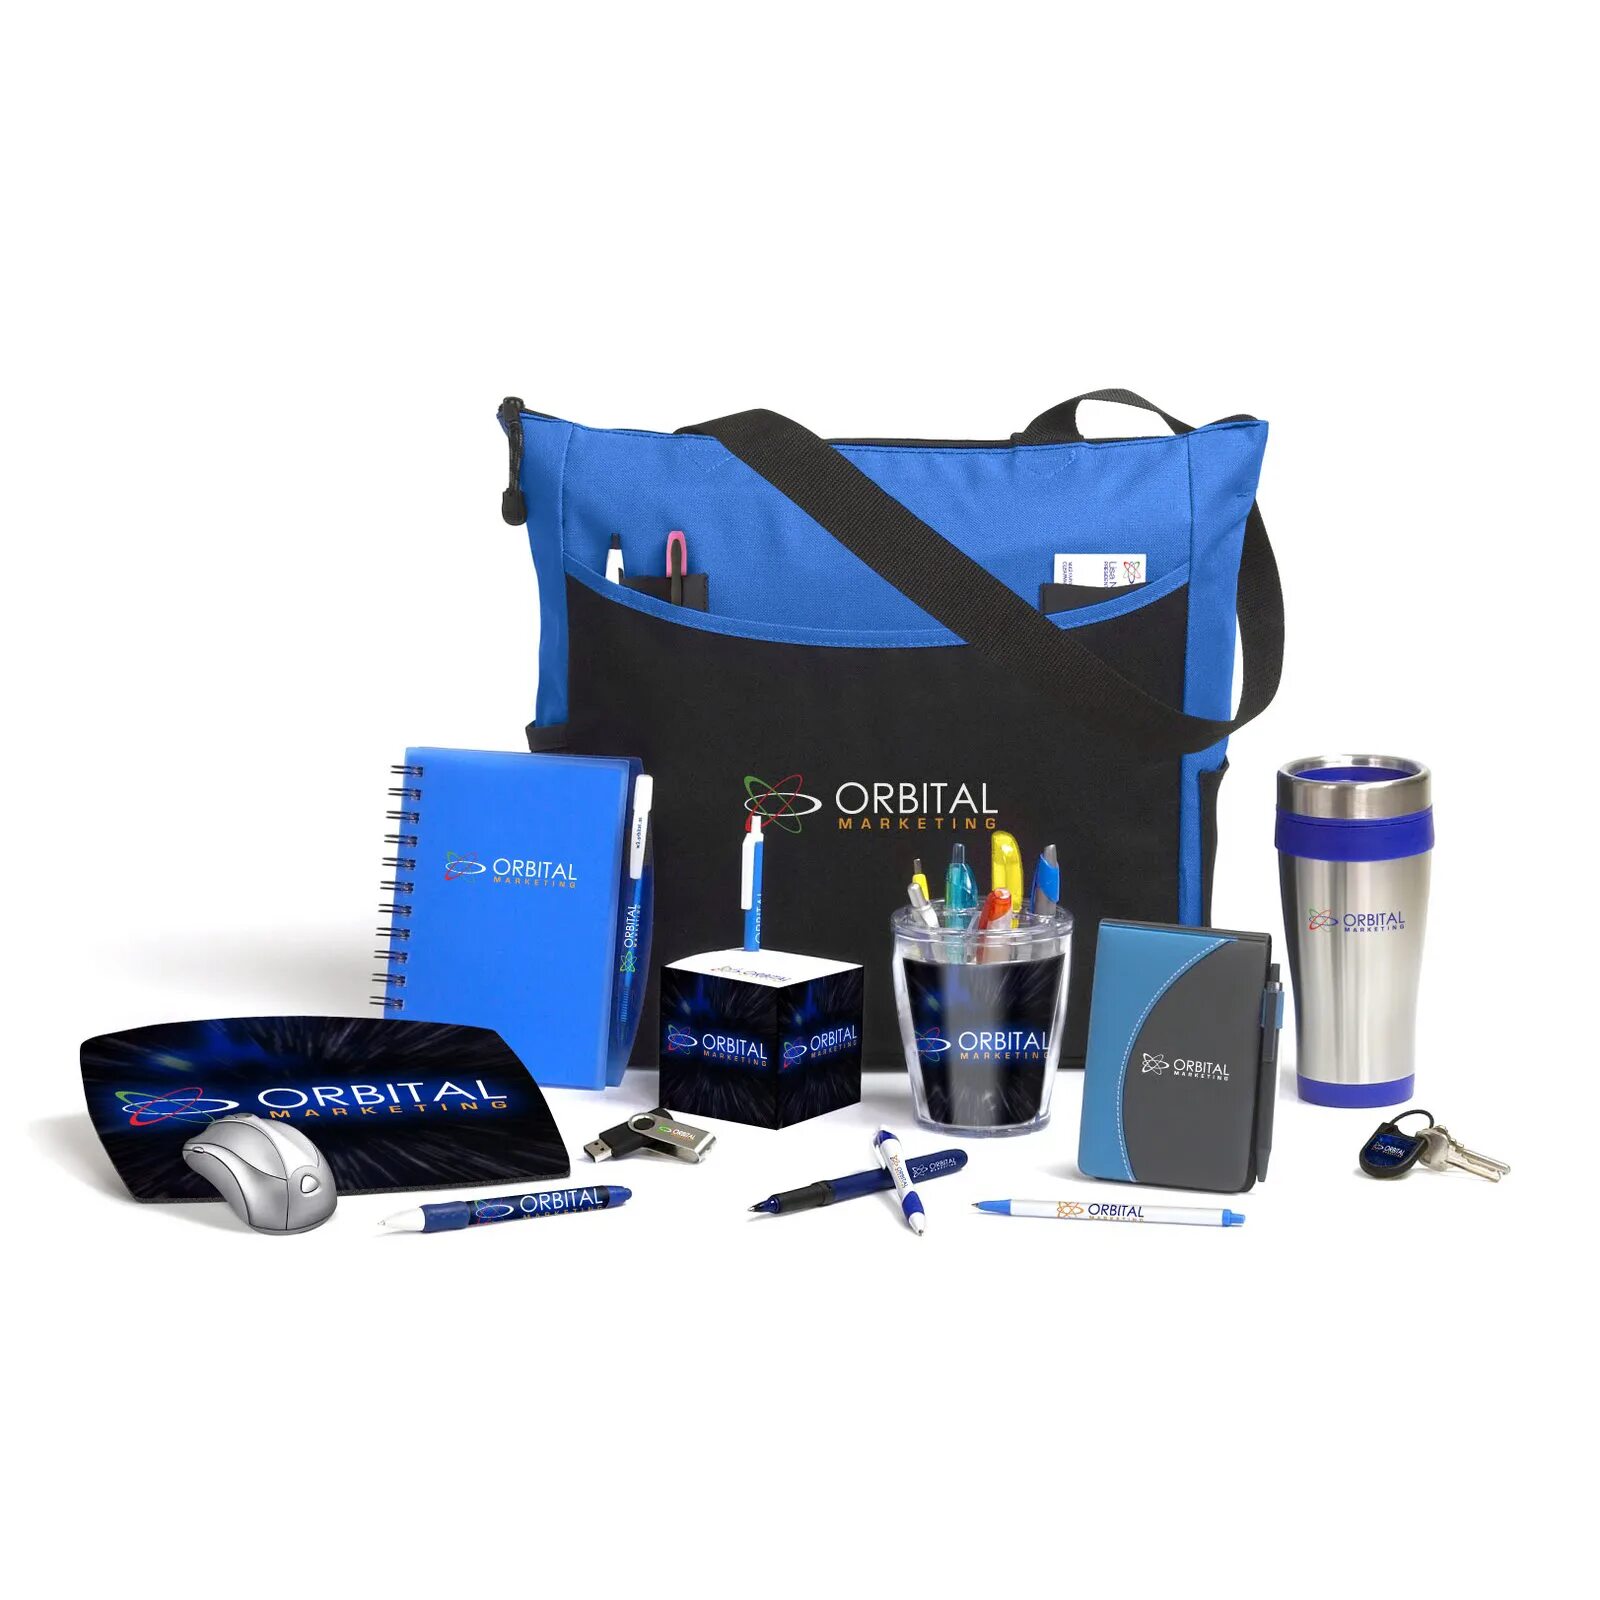 Product promotion. Сувенирная продукция. Promotional products. Promotional Gifts. Promo products your logo.